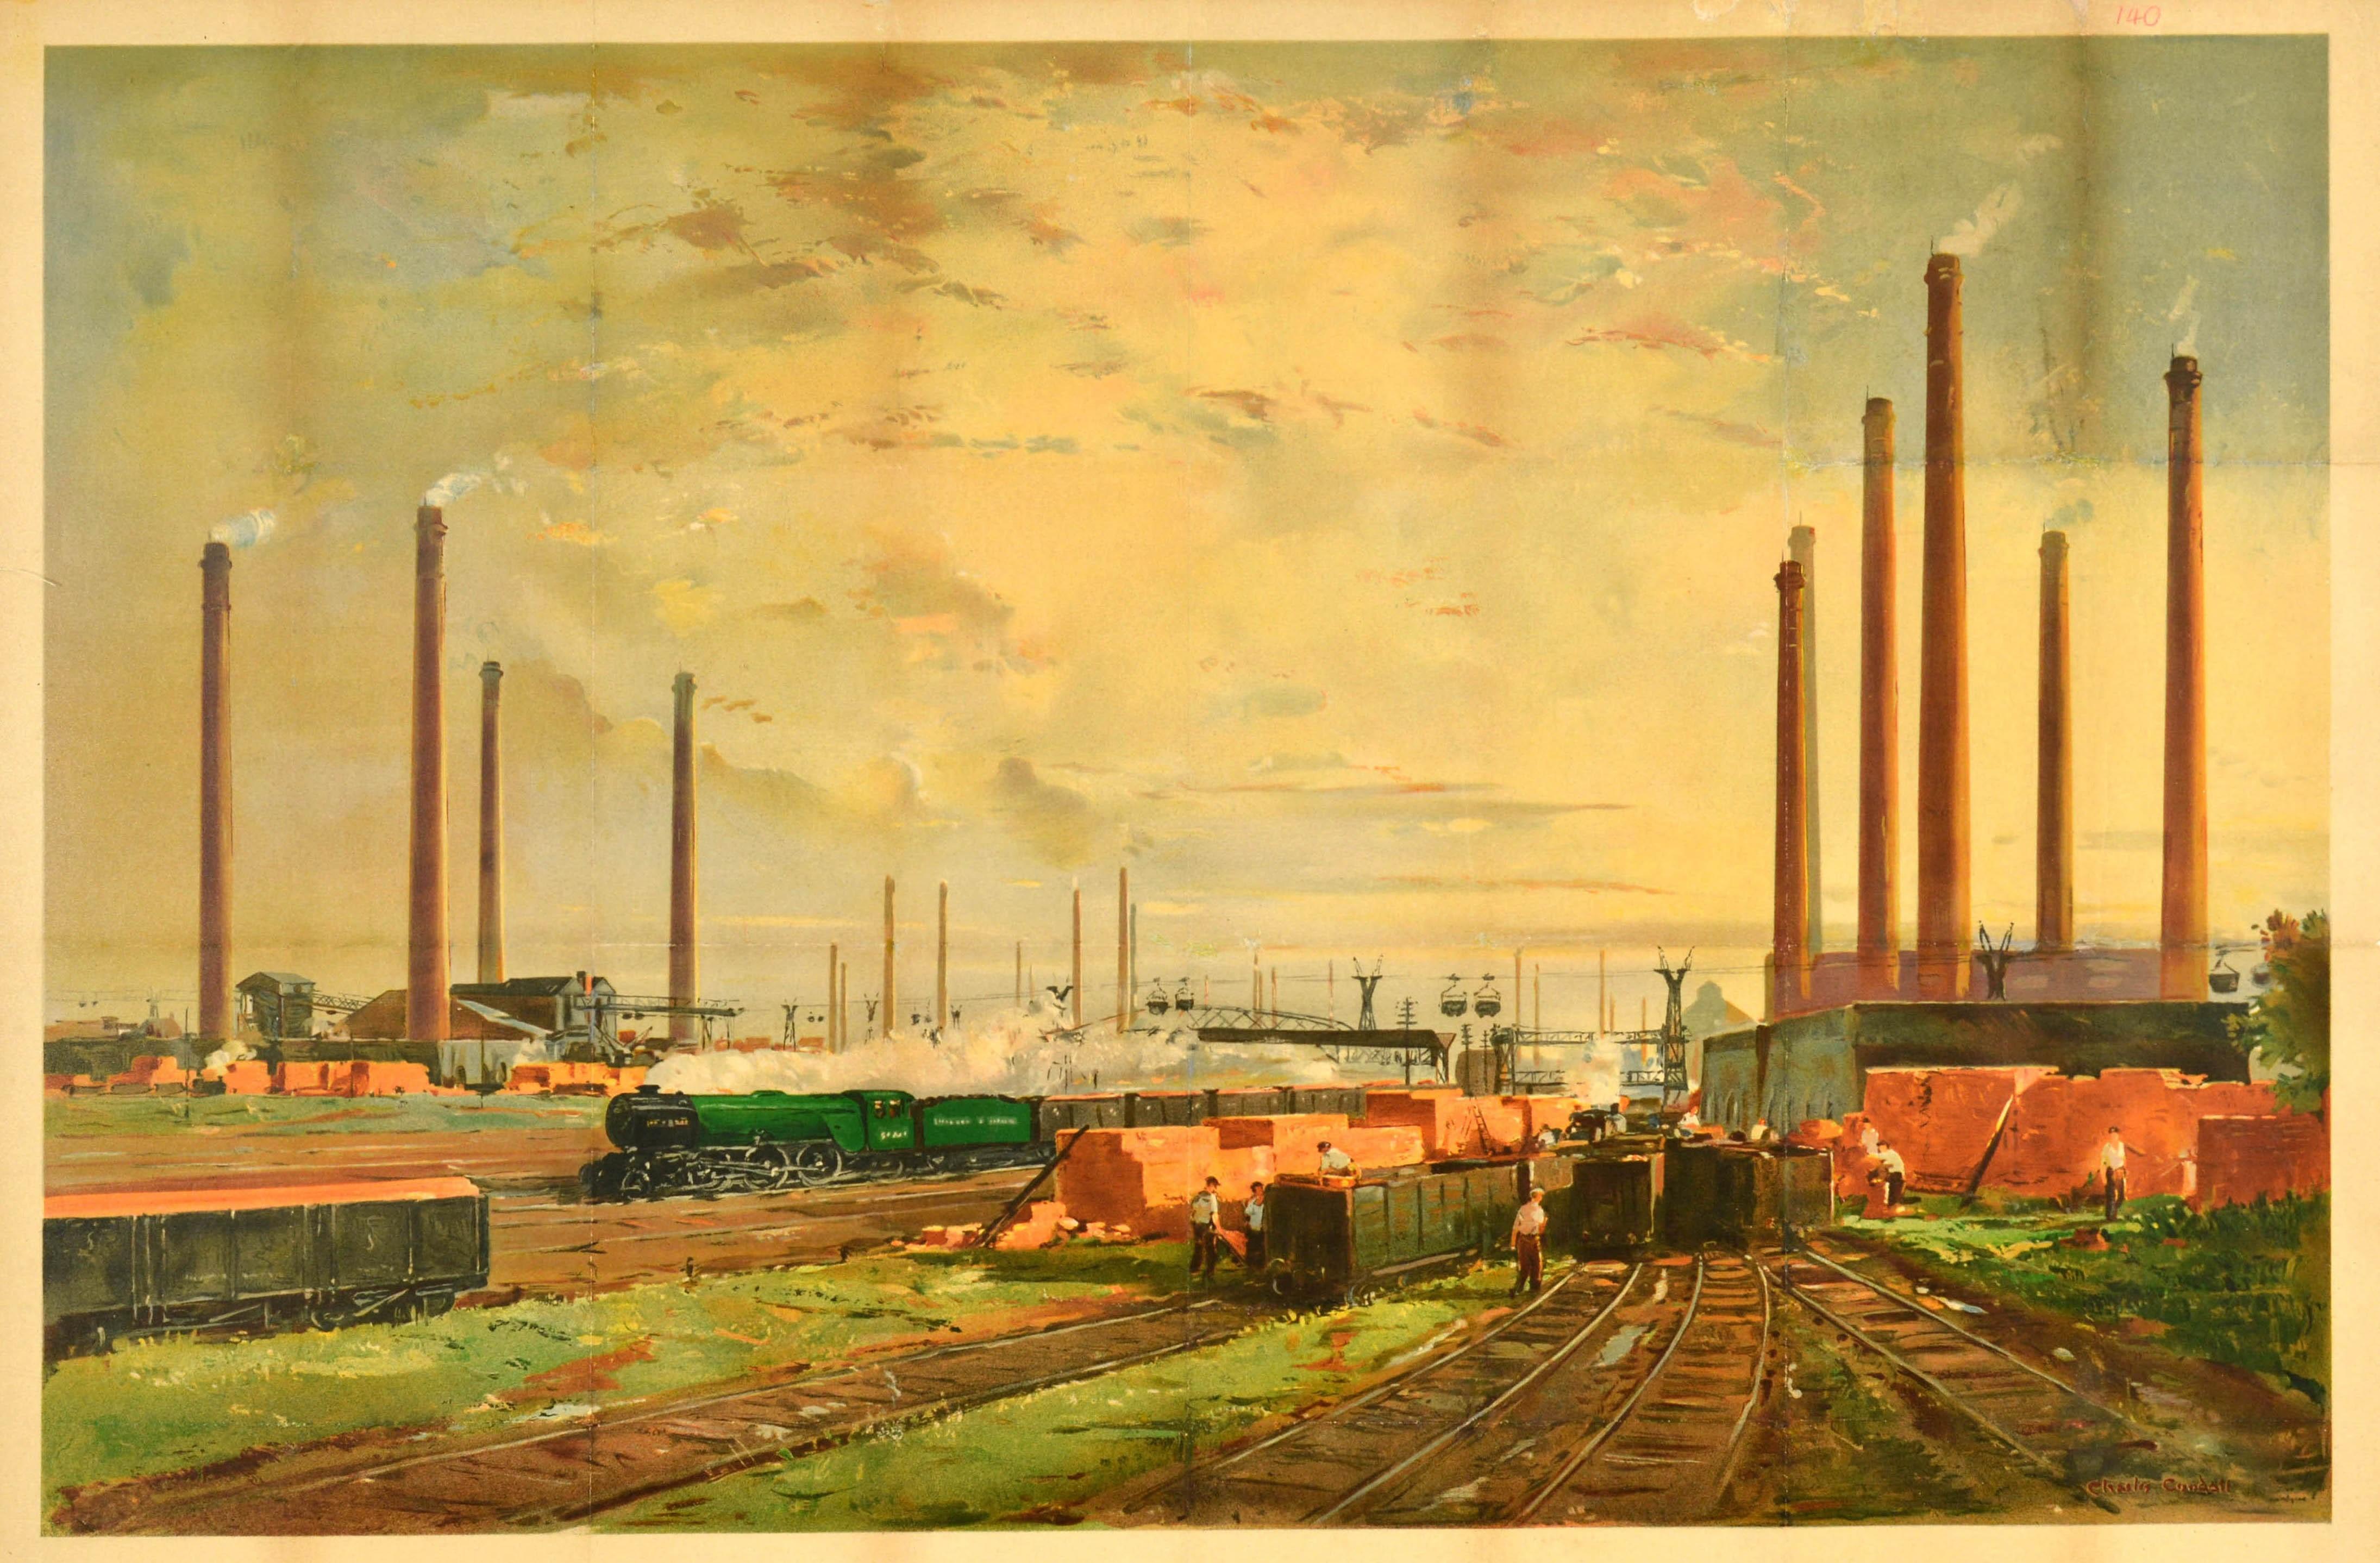 Original vintage British Railways poster - Service to Industry Brick Making - featuring industrial artwork by the English painter Charles Cundall (1890-1971) showing workers by the rail wagons in the foreground and a steam train on the railway